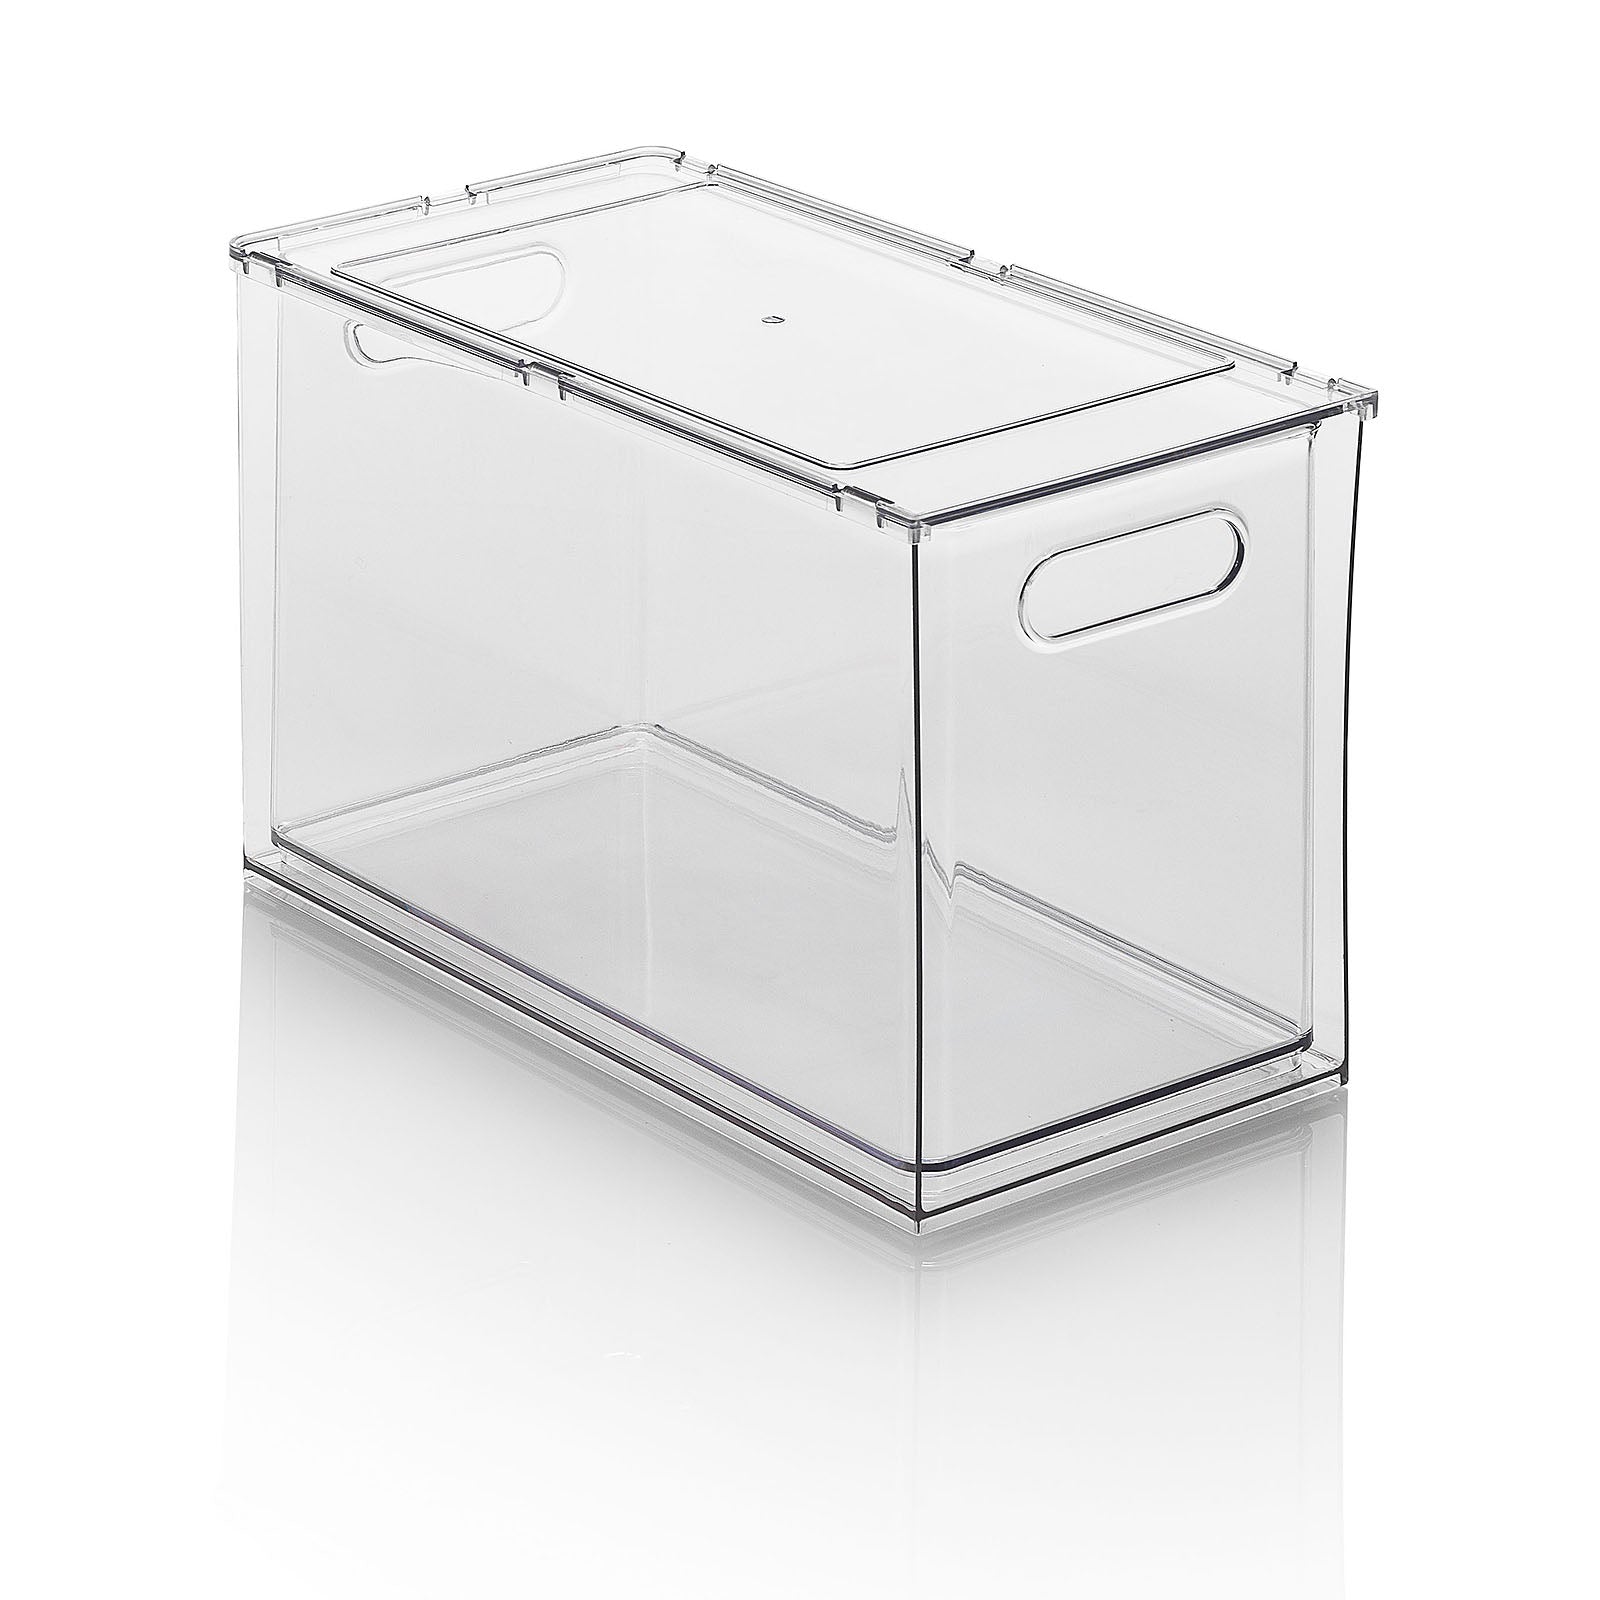 KRAU removable drawer/container with dividers, transparent - TFT Home -  Purchase on Ventis.